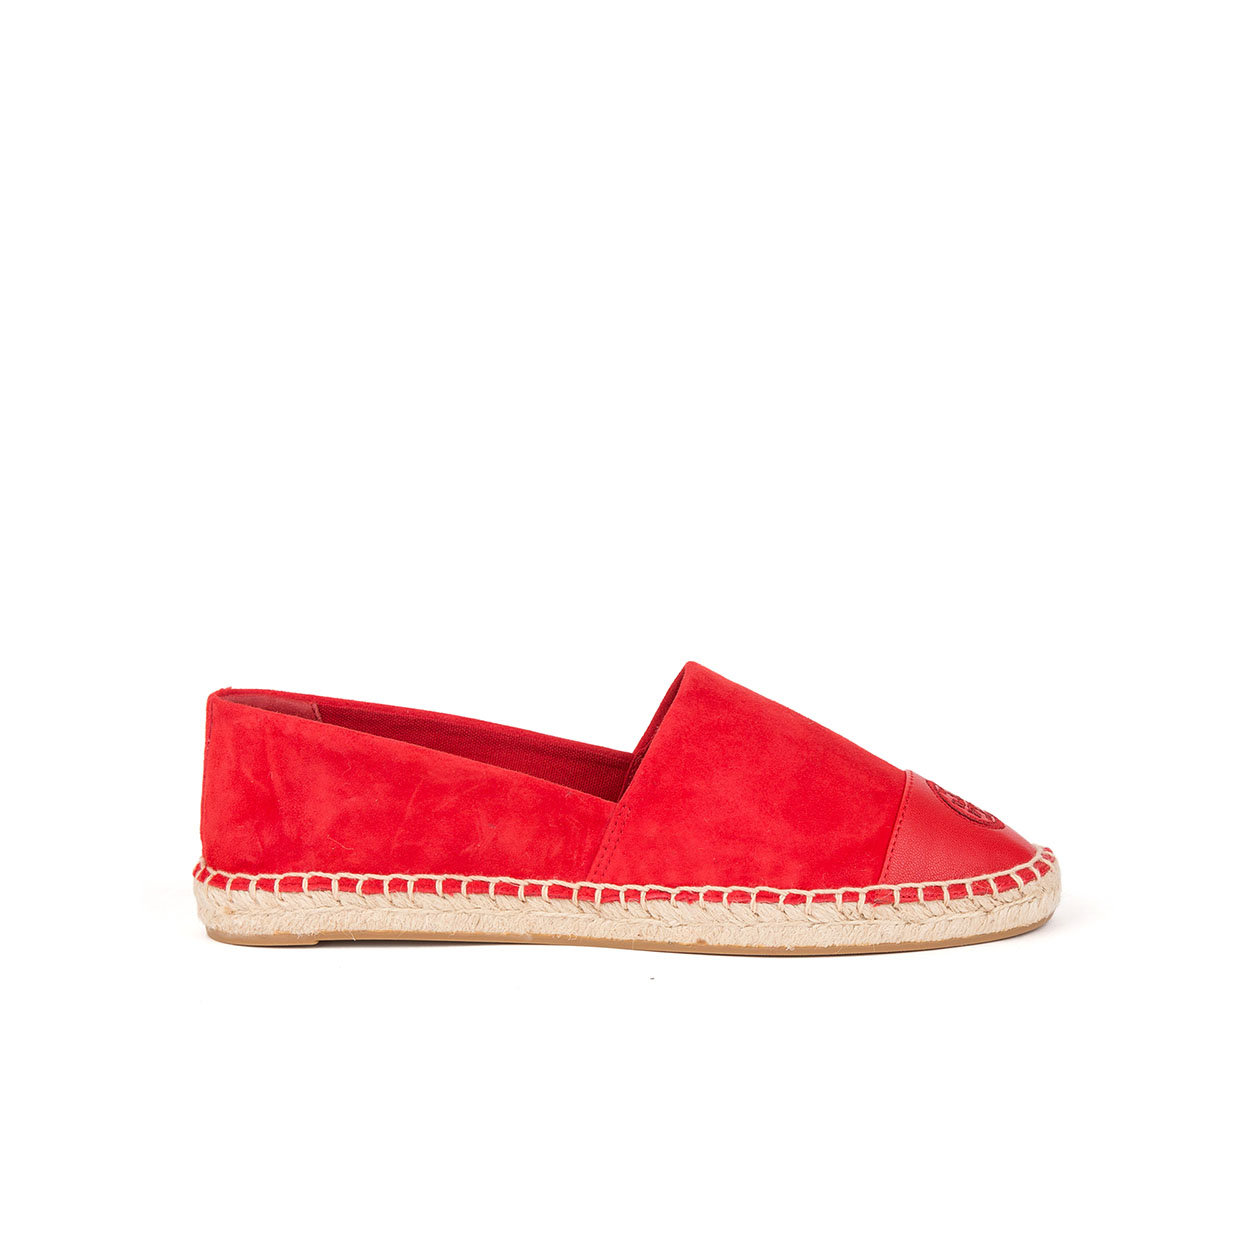 Tory Burch Color Block Red Espadrilles - Tory Burch - Purchase on Ventis.